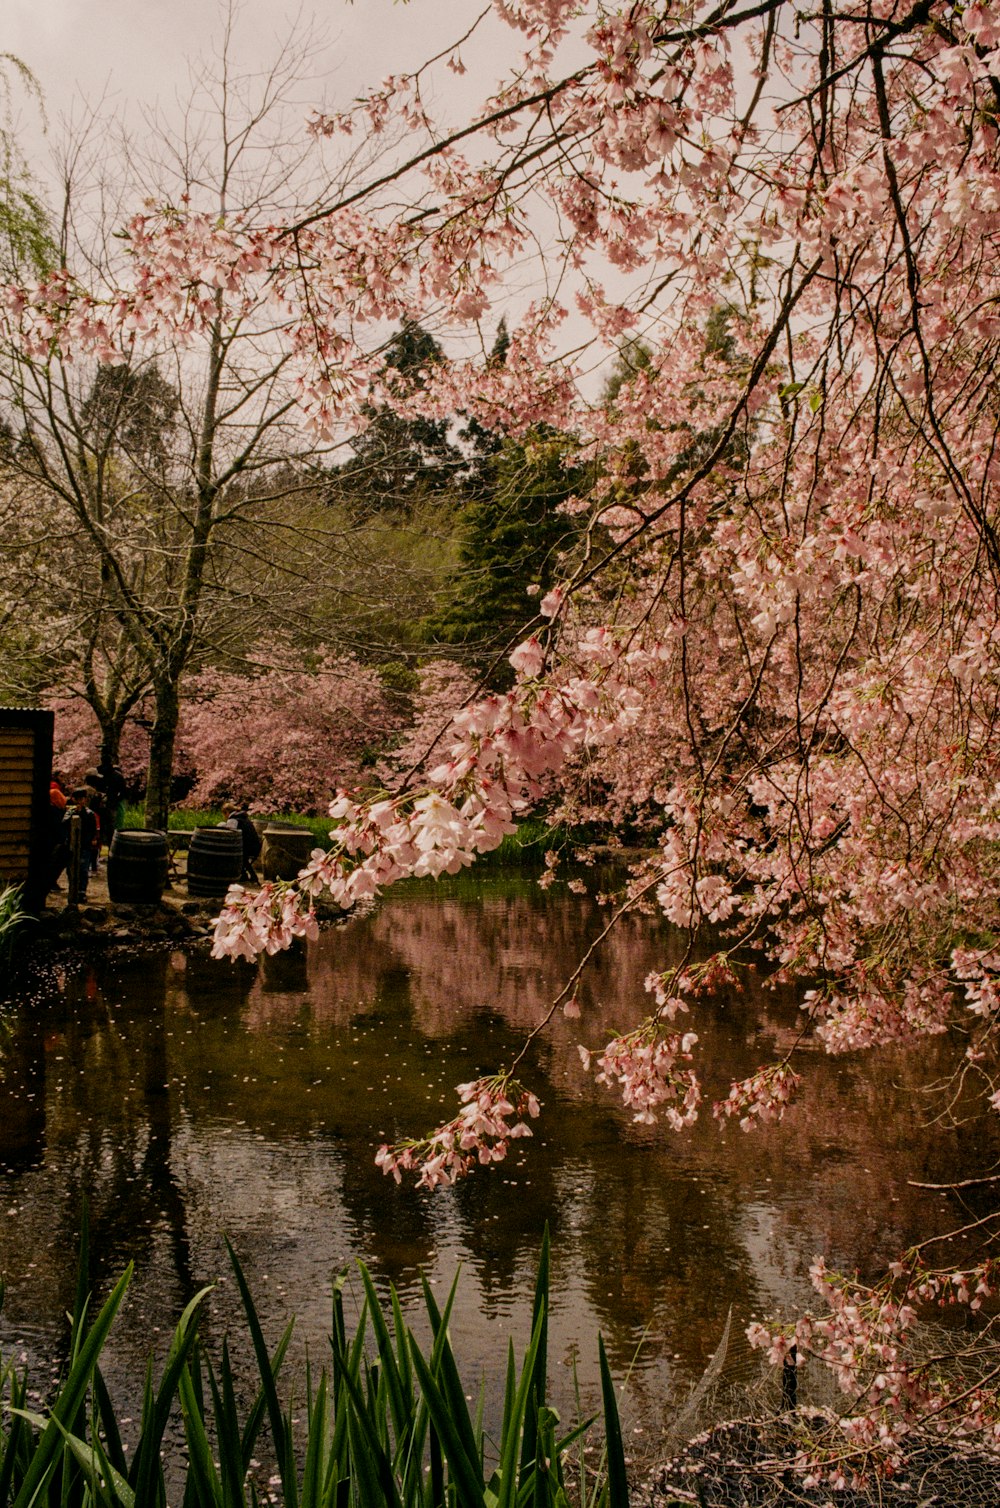 a pond surrounded by trees with pink flowers